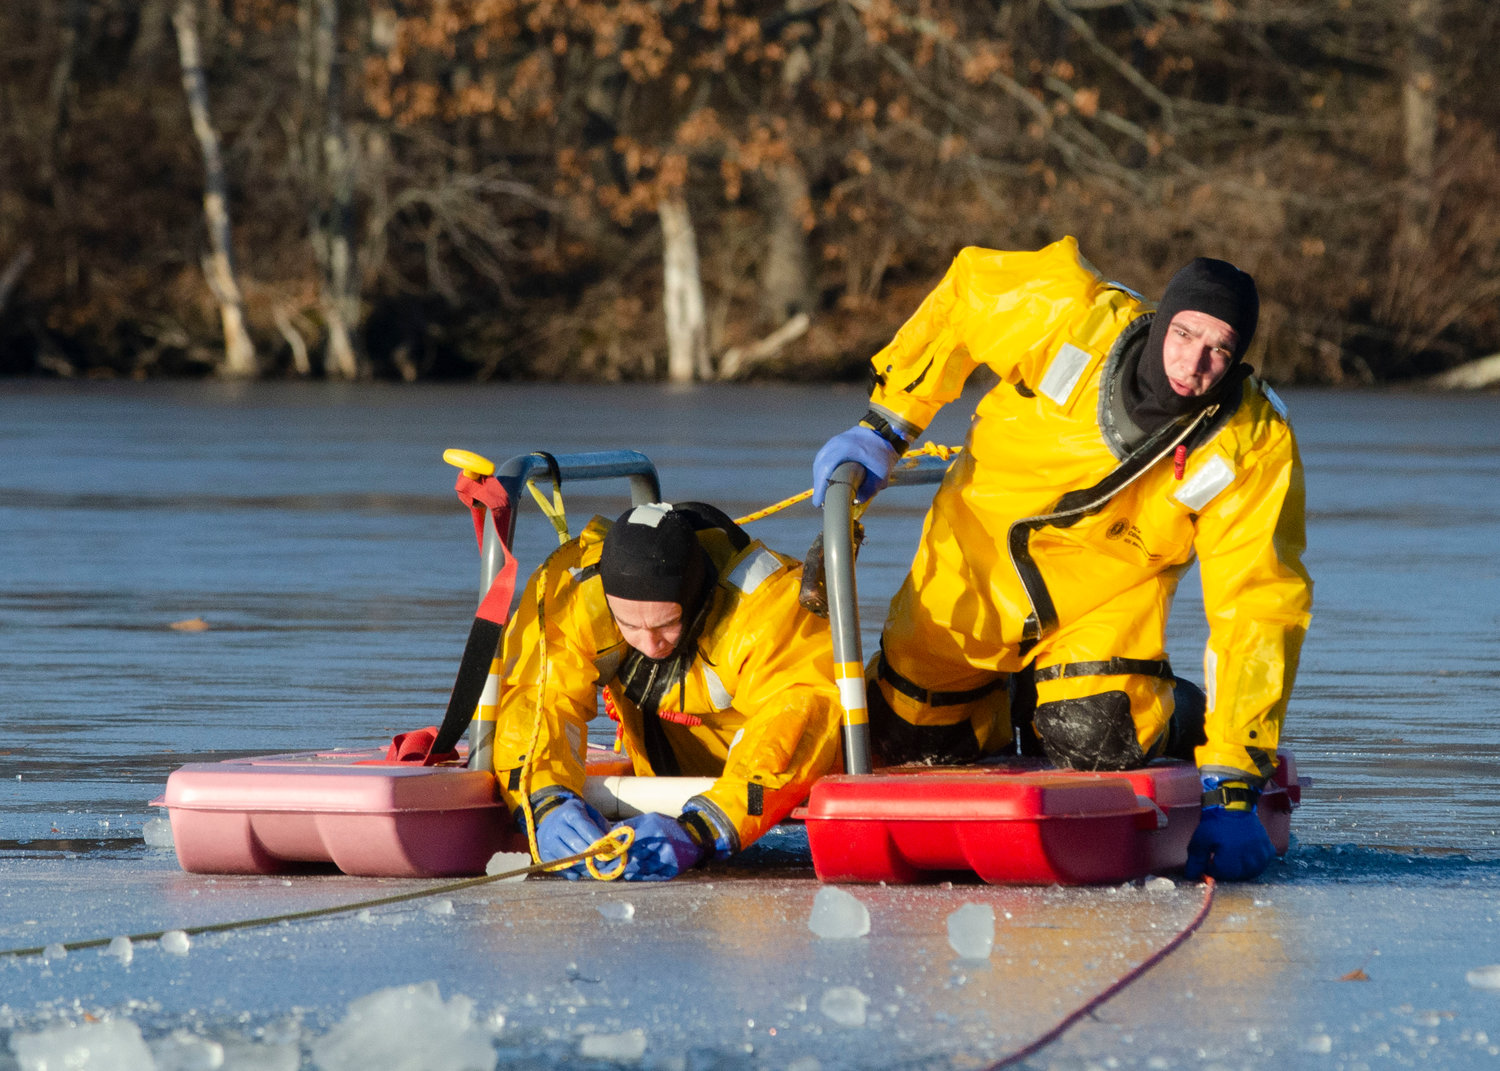 Probationary fireman Jared Pedro gives the signal to be pulled back to shore, once he loads firefighter Brian Masse safely onto the sled during an ice rescue training at Brickyard Pond on Friday afternoon.